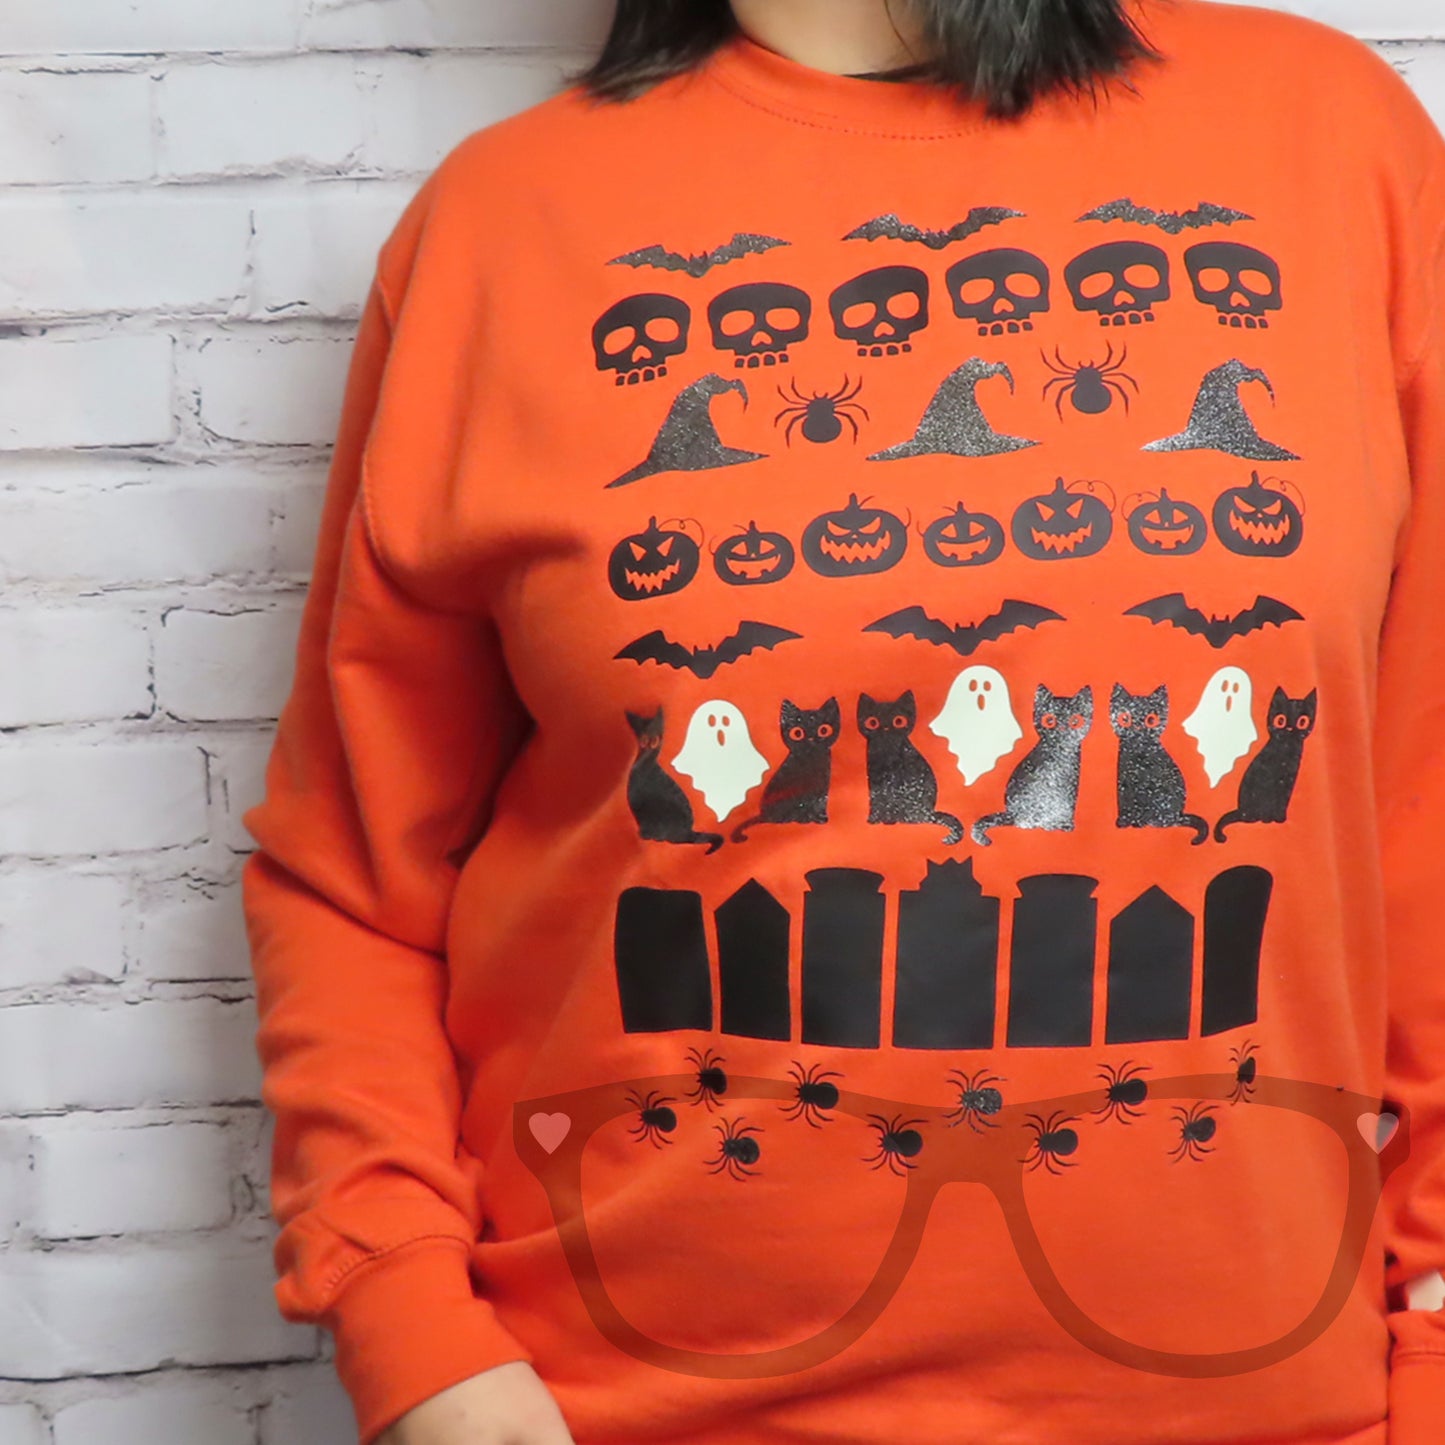 Orange sweater with cute halloween icons such as pumpkins, jack o'lanterns, gloe in the dark ghosts, spiders and glittery hats